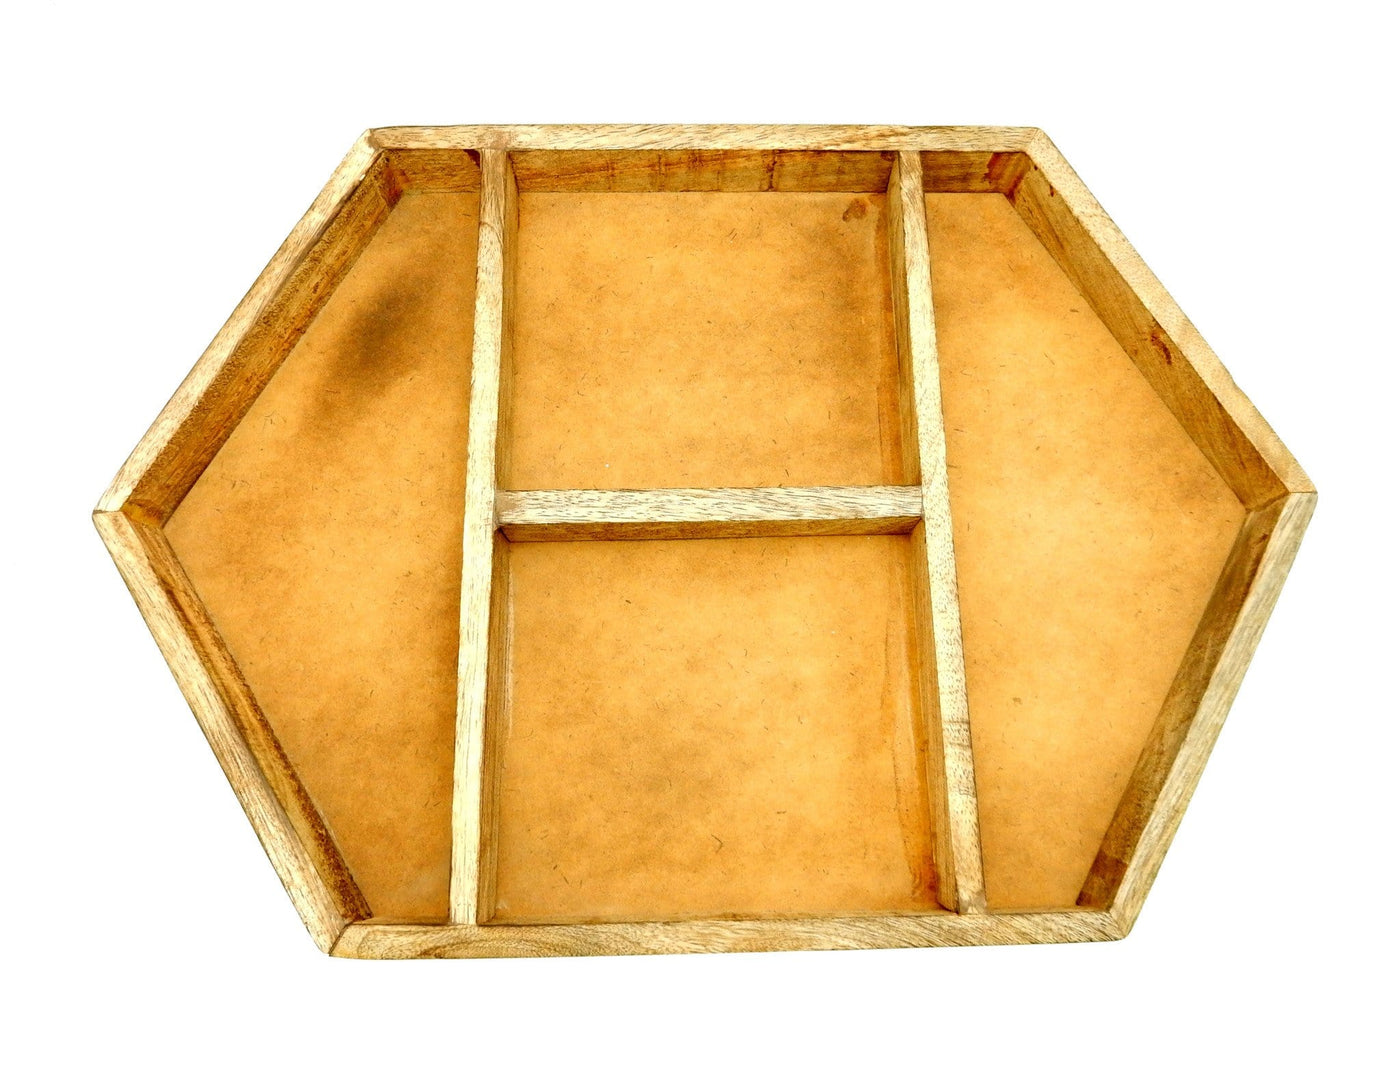 wood tray with crystals on white background